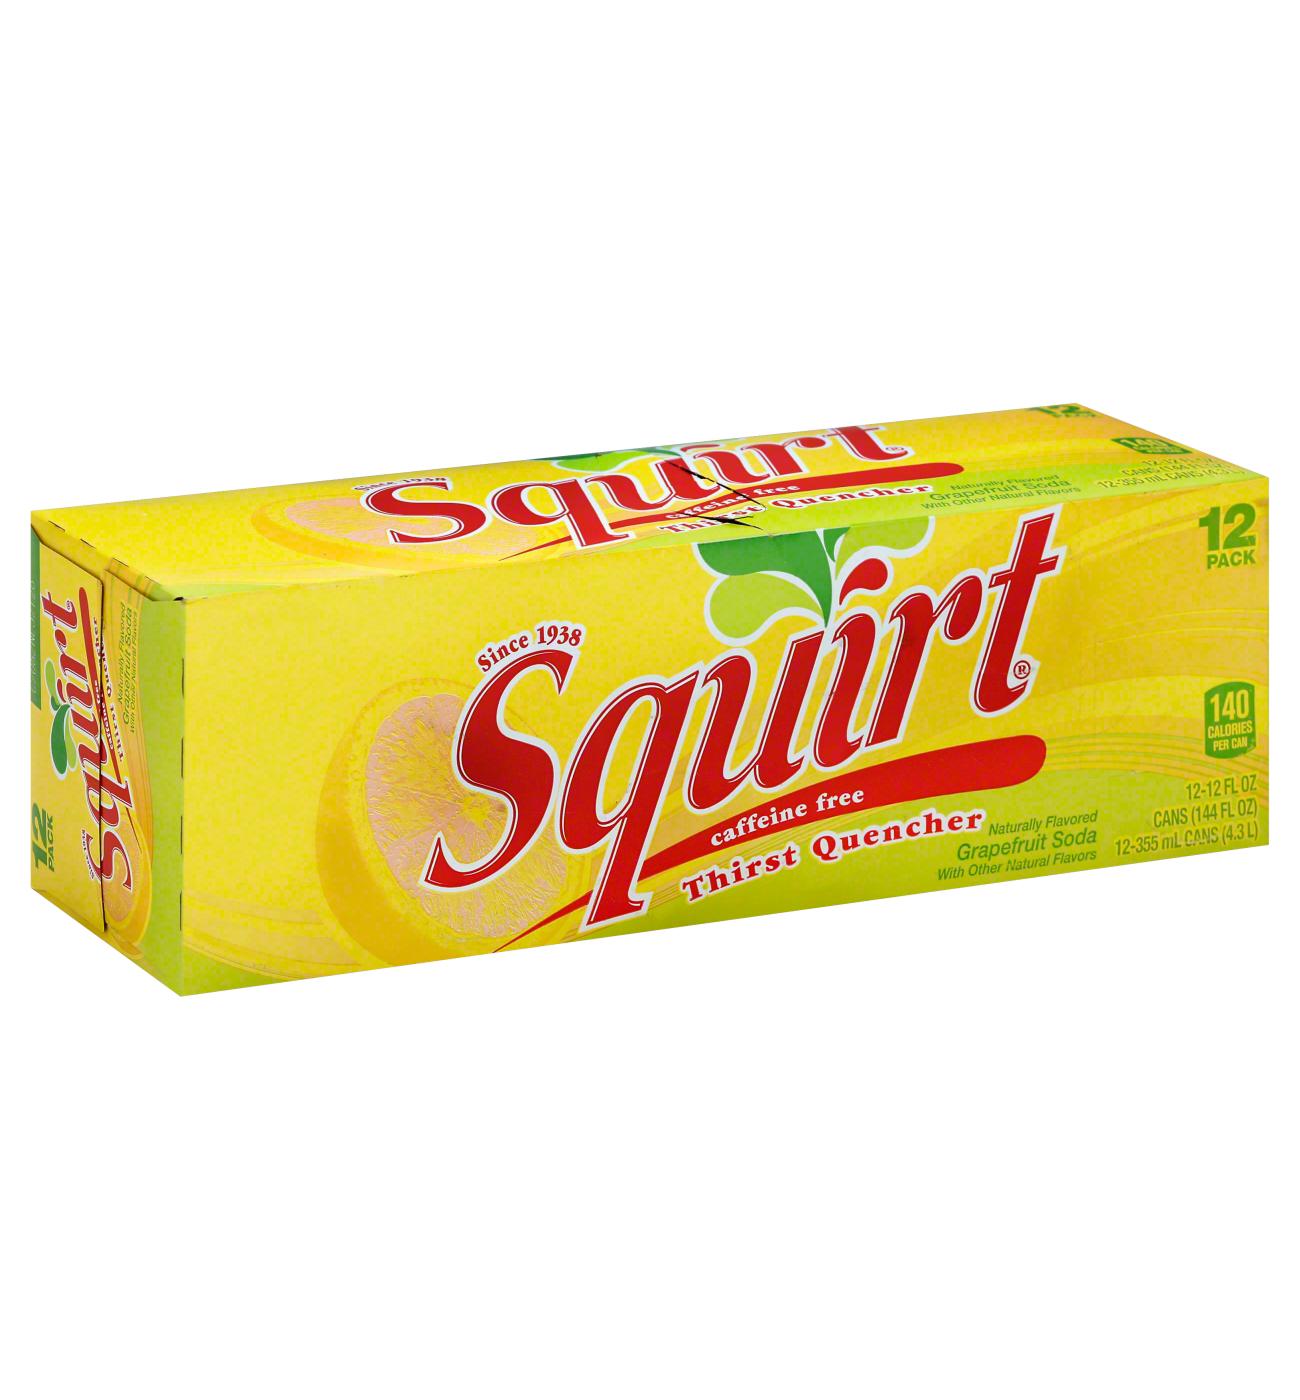 Squirt Grapefruit Soda 12 pk Cans; image 1 of 3